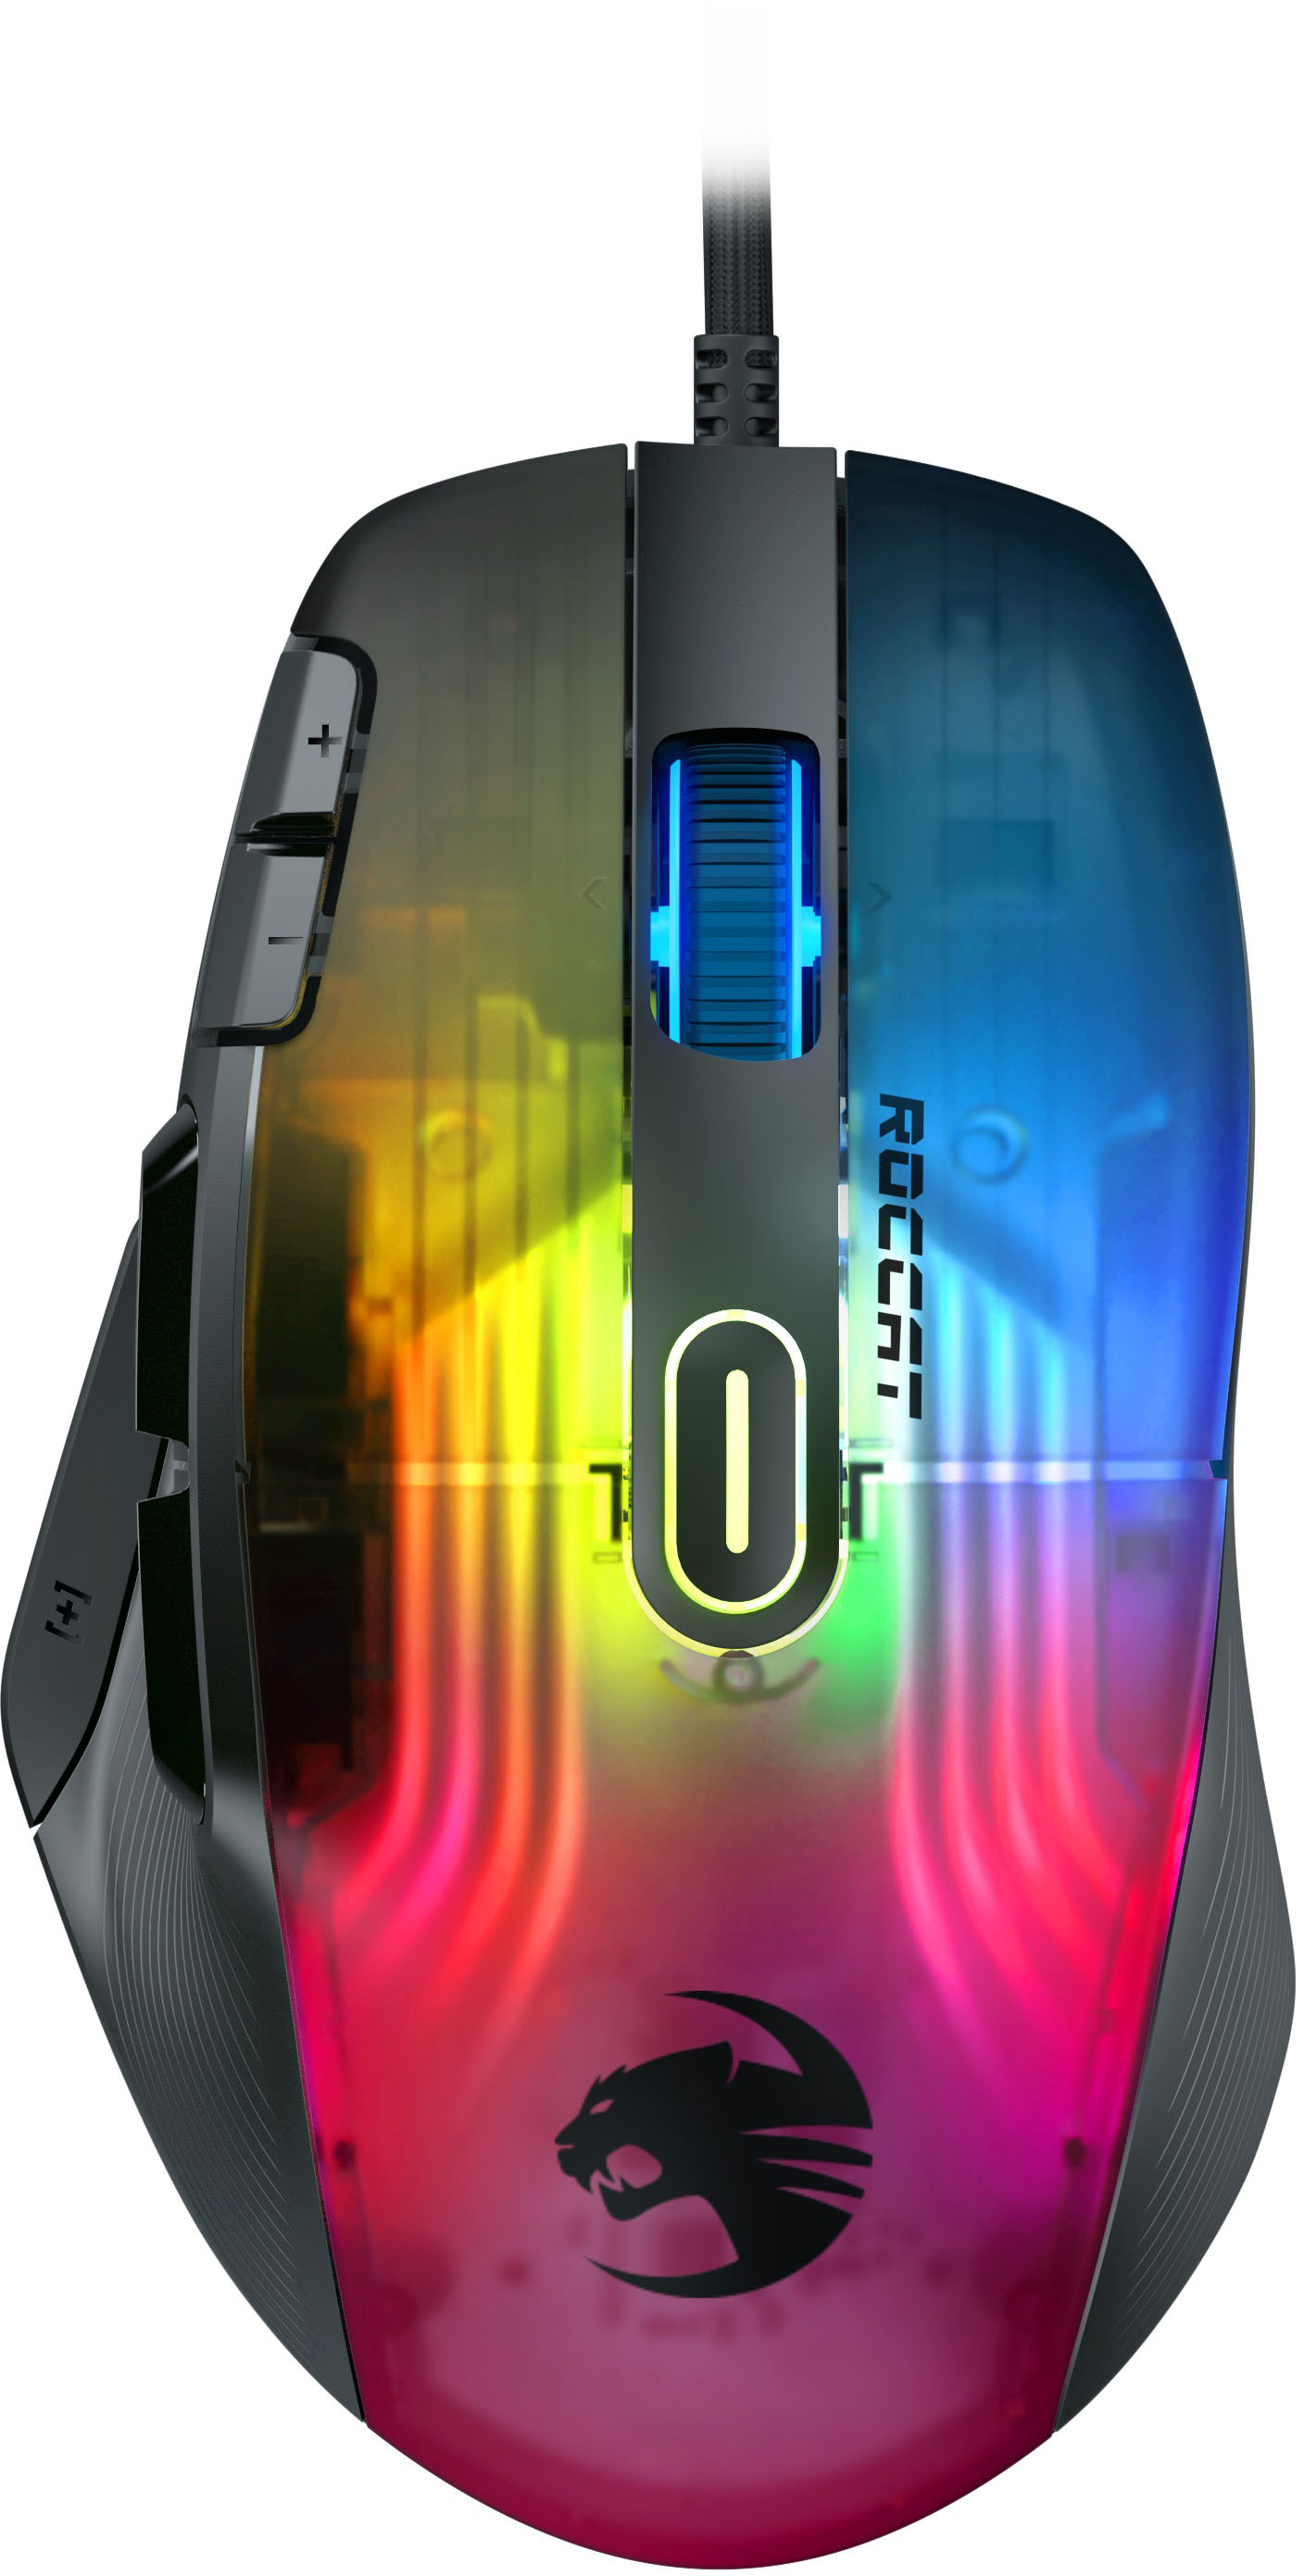 Roccat - Kone XP Wired Optical Gaming Ambidextrous Mouse with Multi-button Design & Aimo RGB Lighting - Black